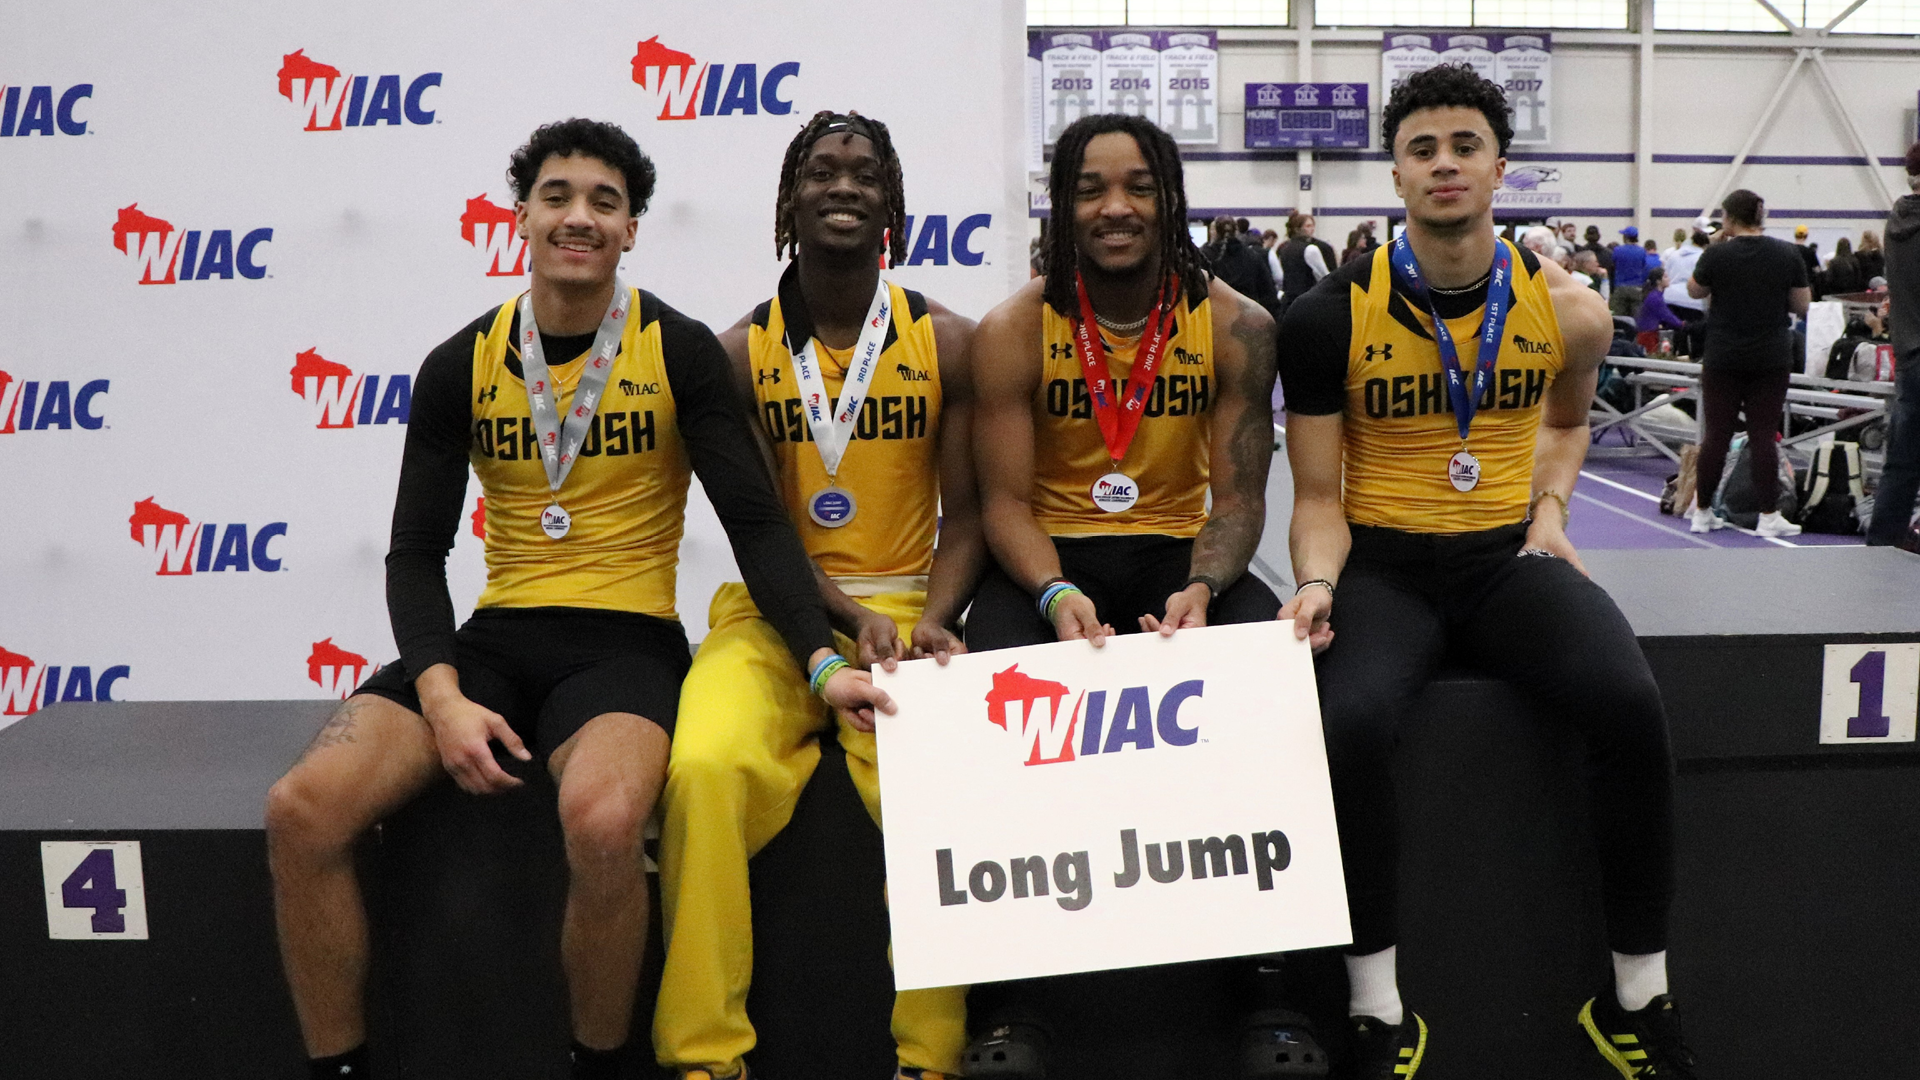 Left to right: Charlie Nolan, Caleb Wright, Londyn Little and Joshua Rivers after placing in the long jump on Friday. Photo Credit: Autumn Krause, UW-Whitewater Sports Information